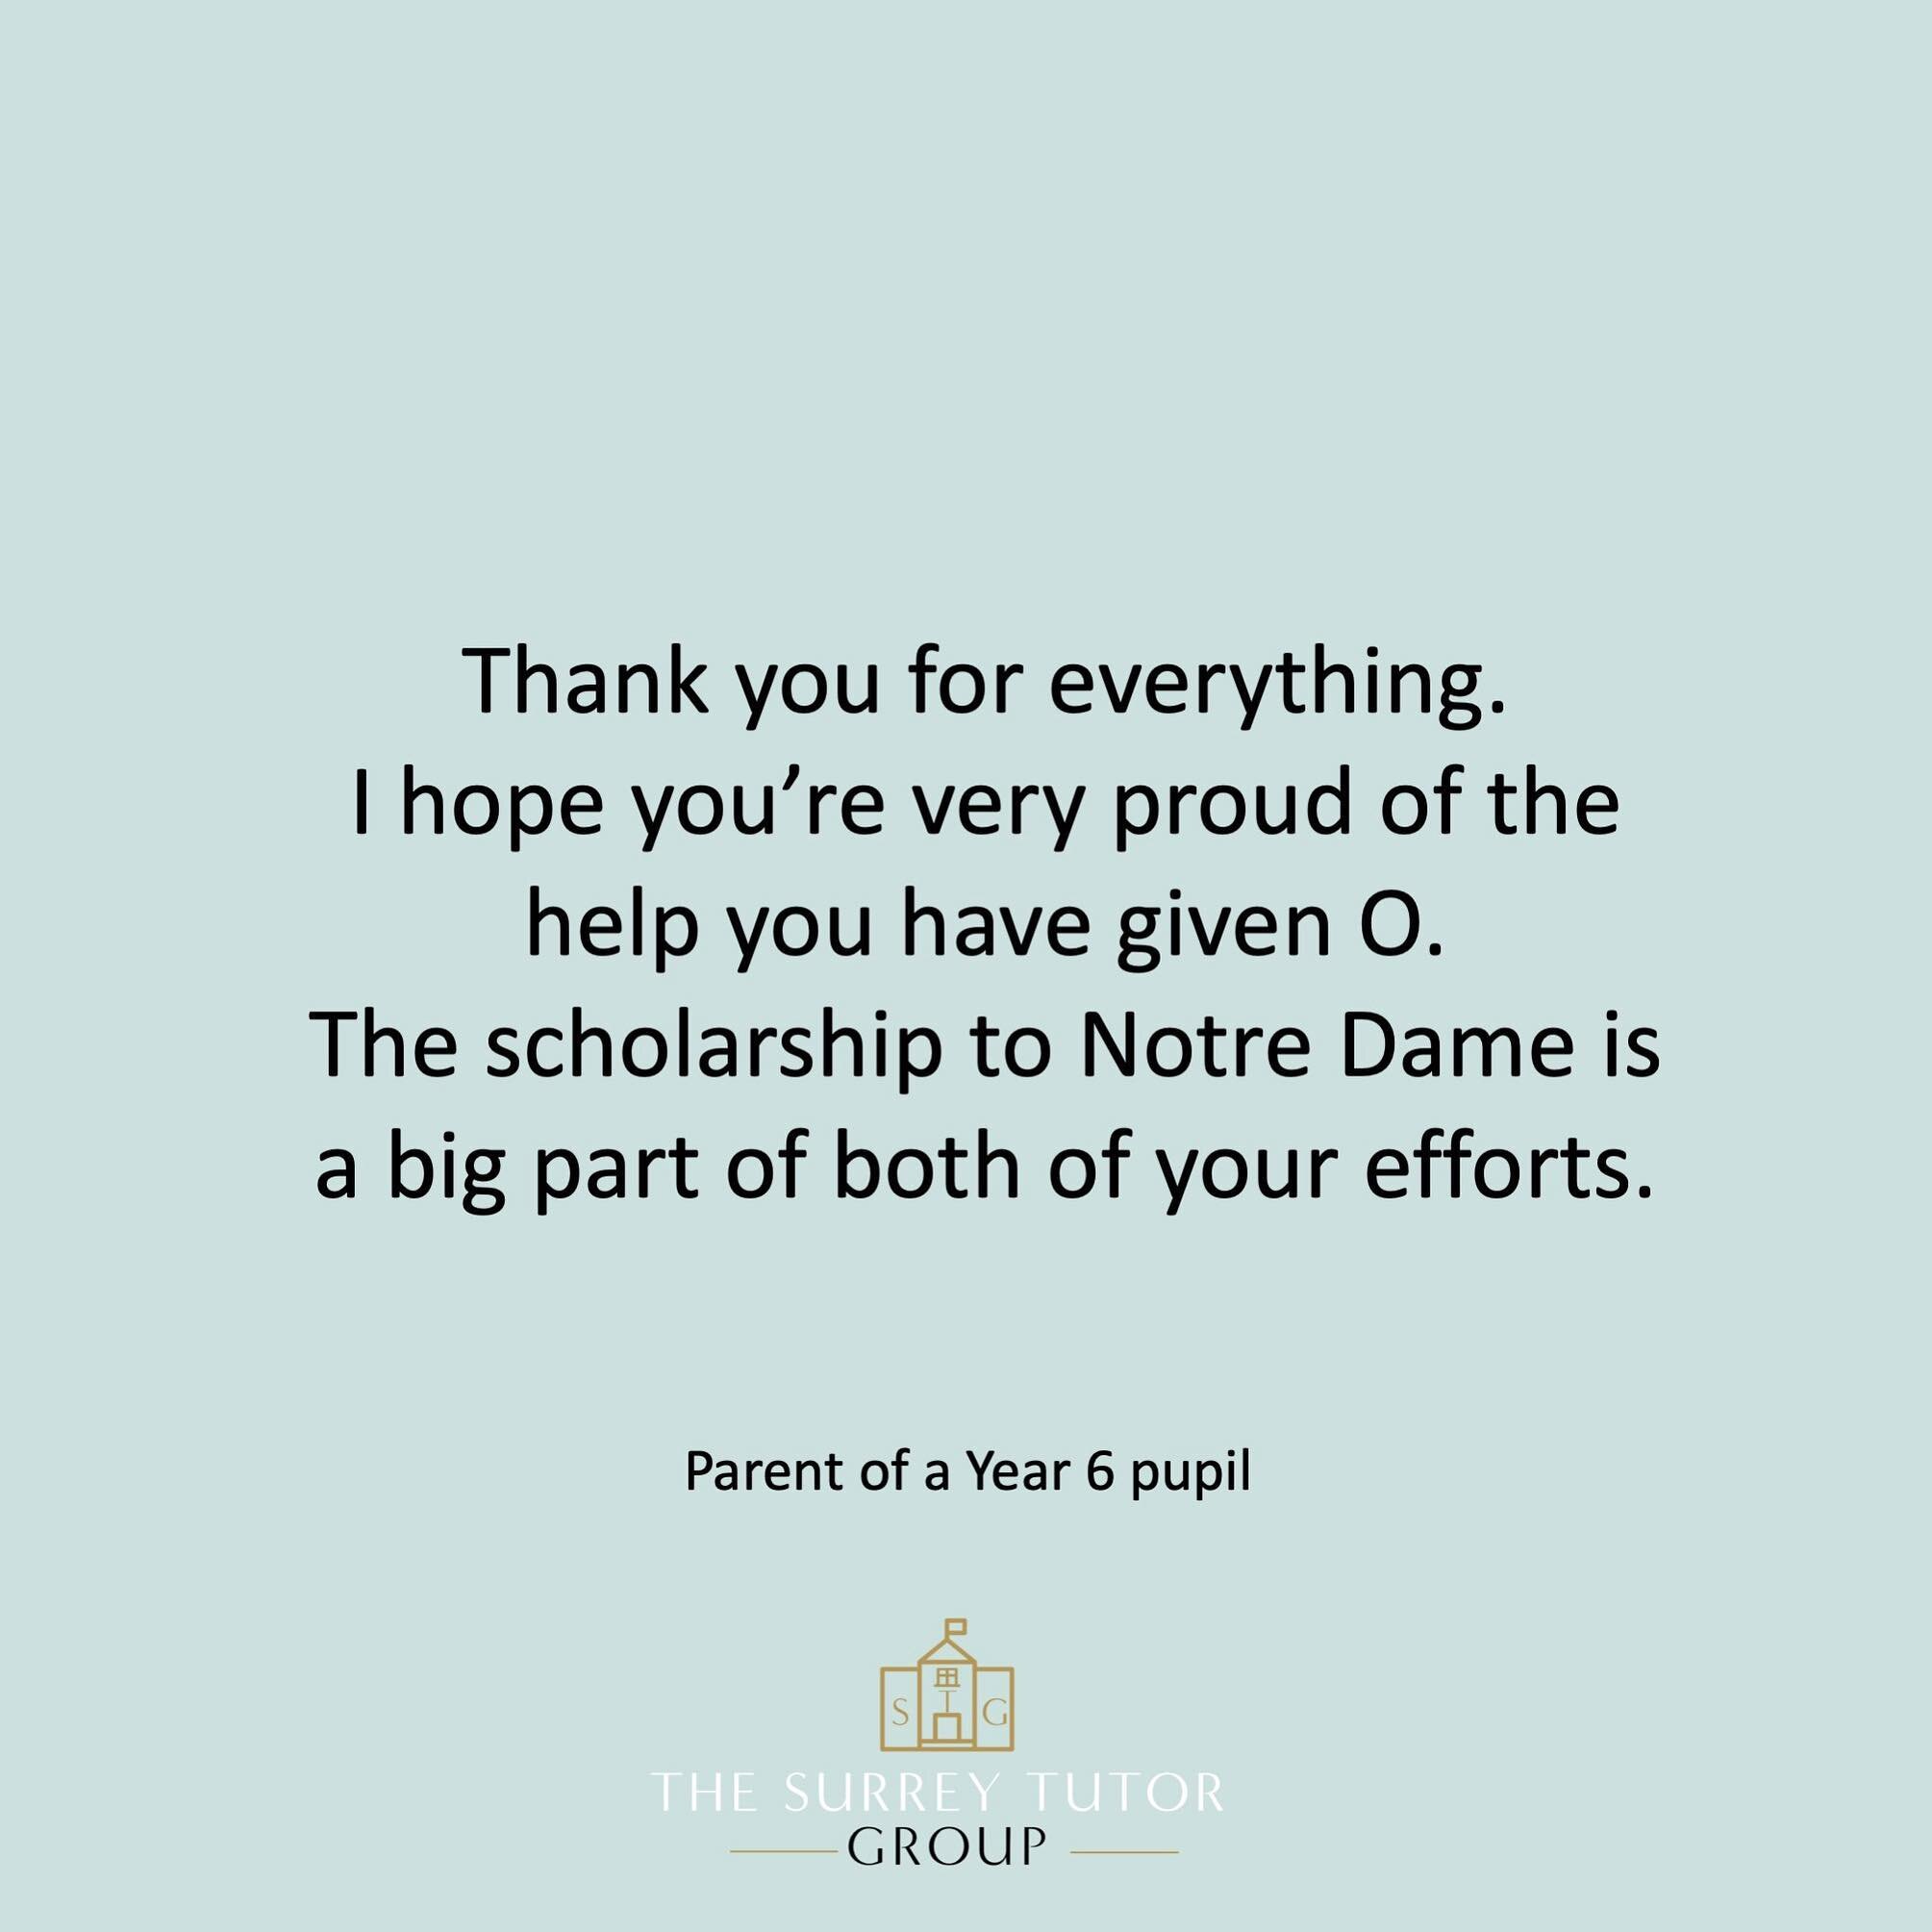 Thankful Thursday&rsquo;s Testimonial. 

We are so proud of our pupil&rsquo;s consistent hard work, unwavering commitment and determination to succeed.✨

Consistency is the key to success.

#thesurreytutorgroup #surreybusiness #privatetuition #11+exa